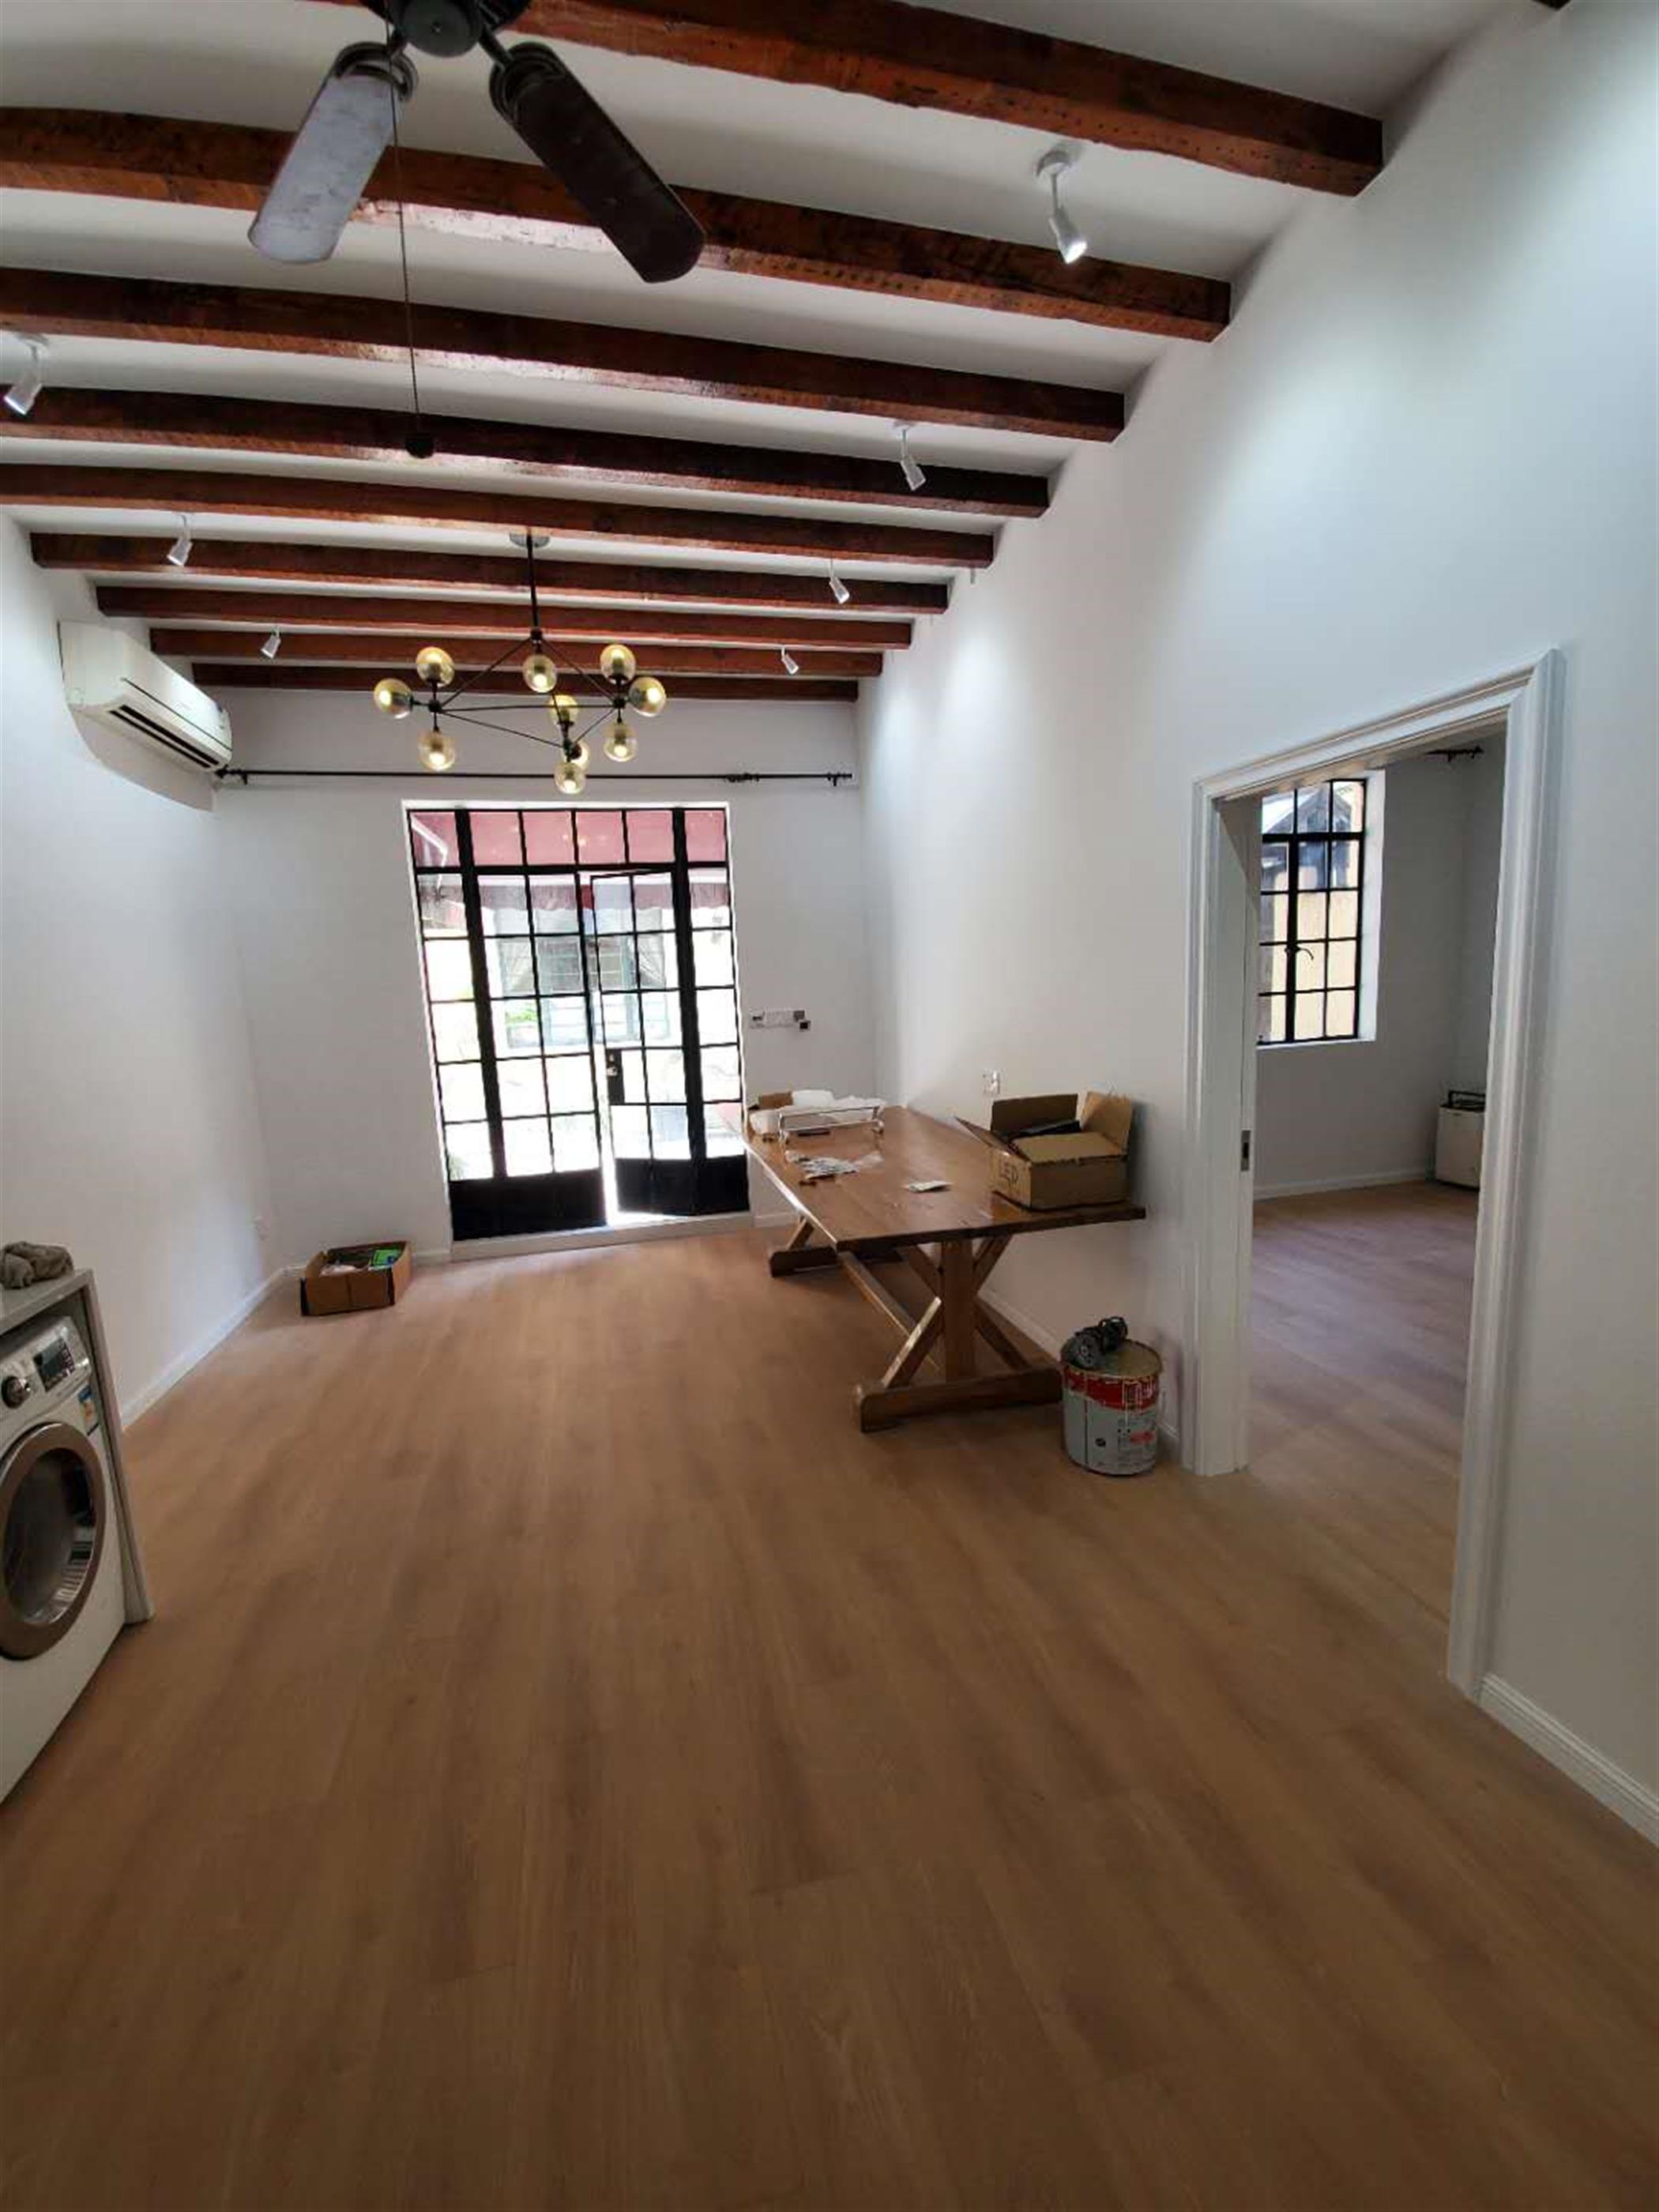 wooden beams Spacious 2BR FFC Lane House Apt w Private Courtyard Nr Ln 1/9/10/12 for Rent in Shanghai